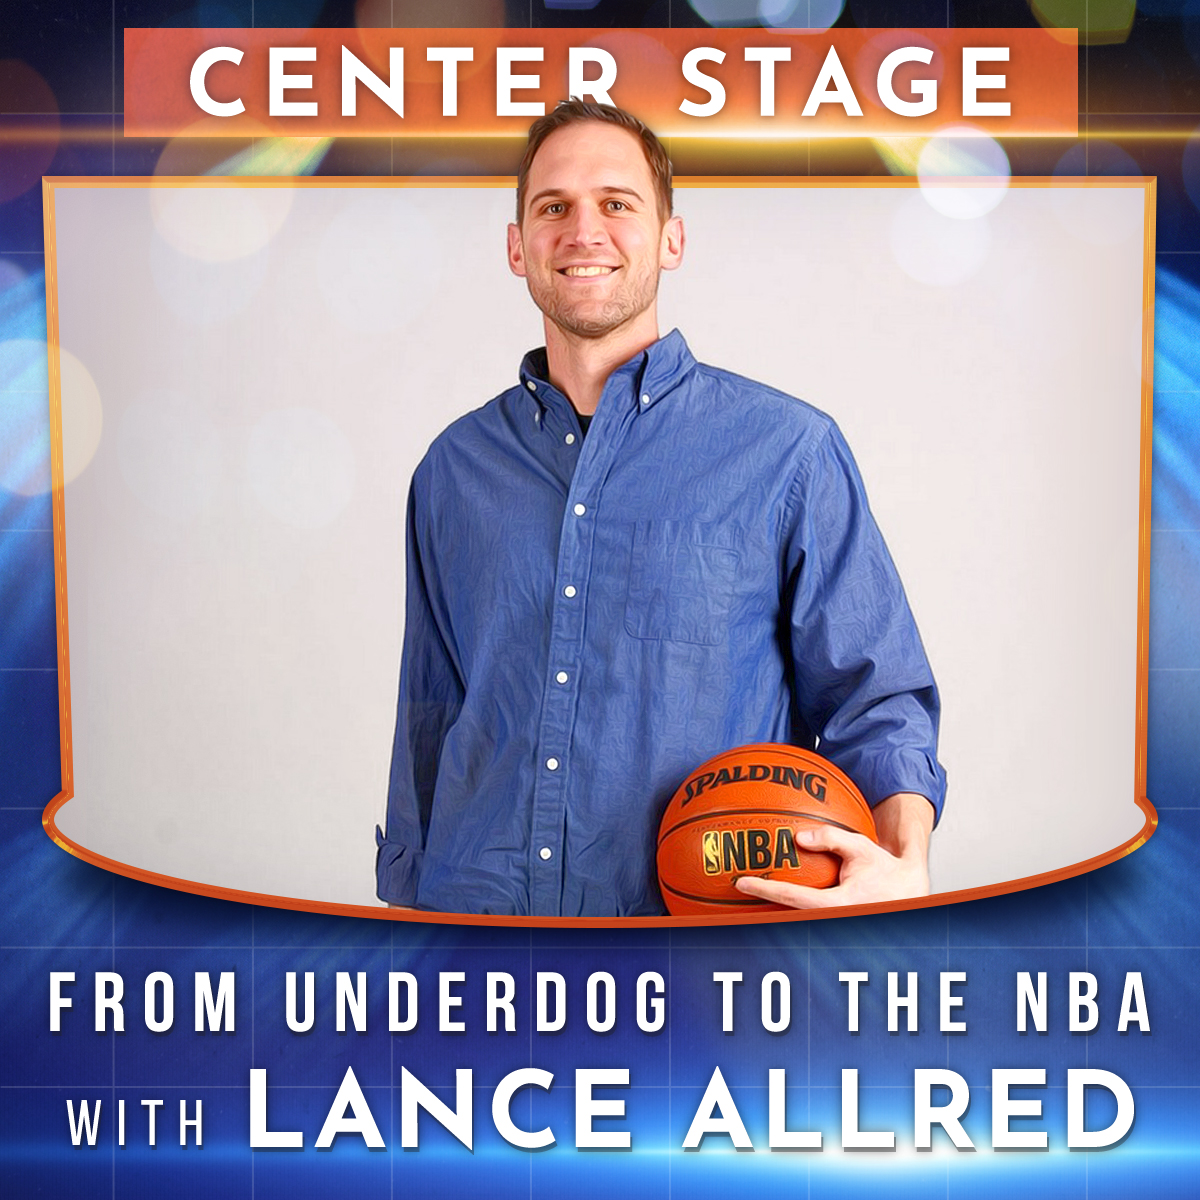 Lance Allred, the first deaf player in NBA history and an expert on leadership, perseverance, and grit. He's wearing a blue shirt, holding a basketball over a white background.